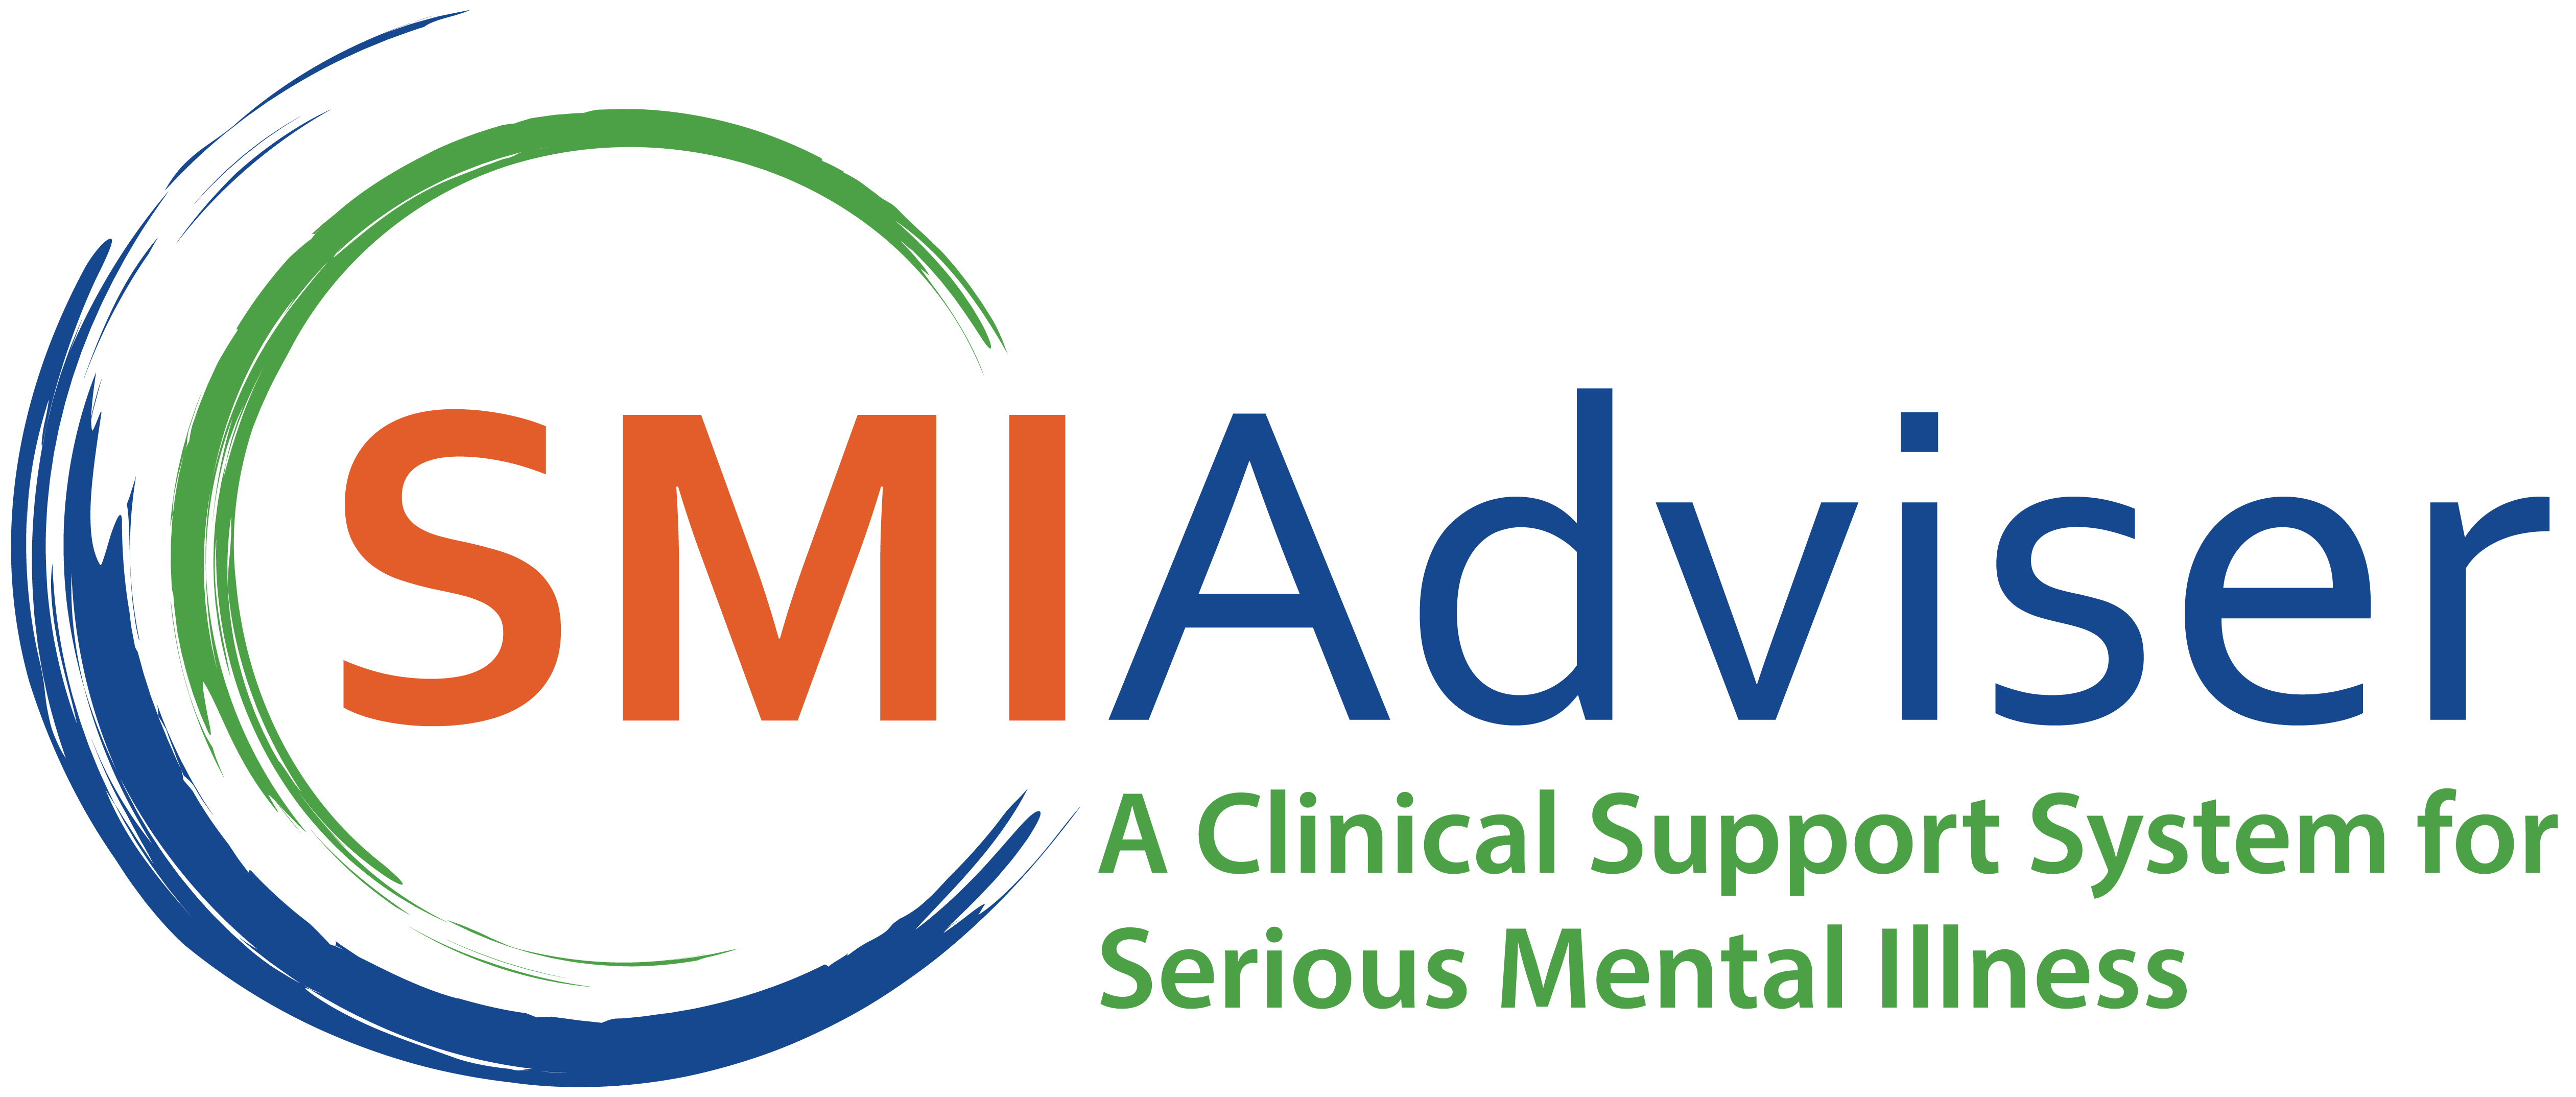 Clinical Support System for Serious Mental Illness